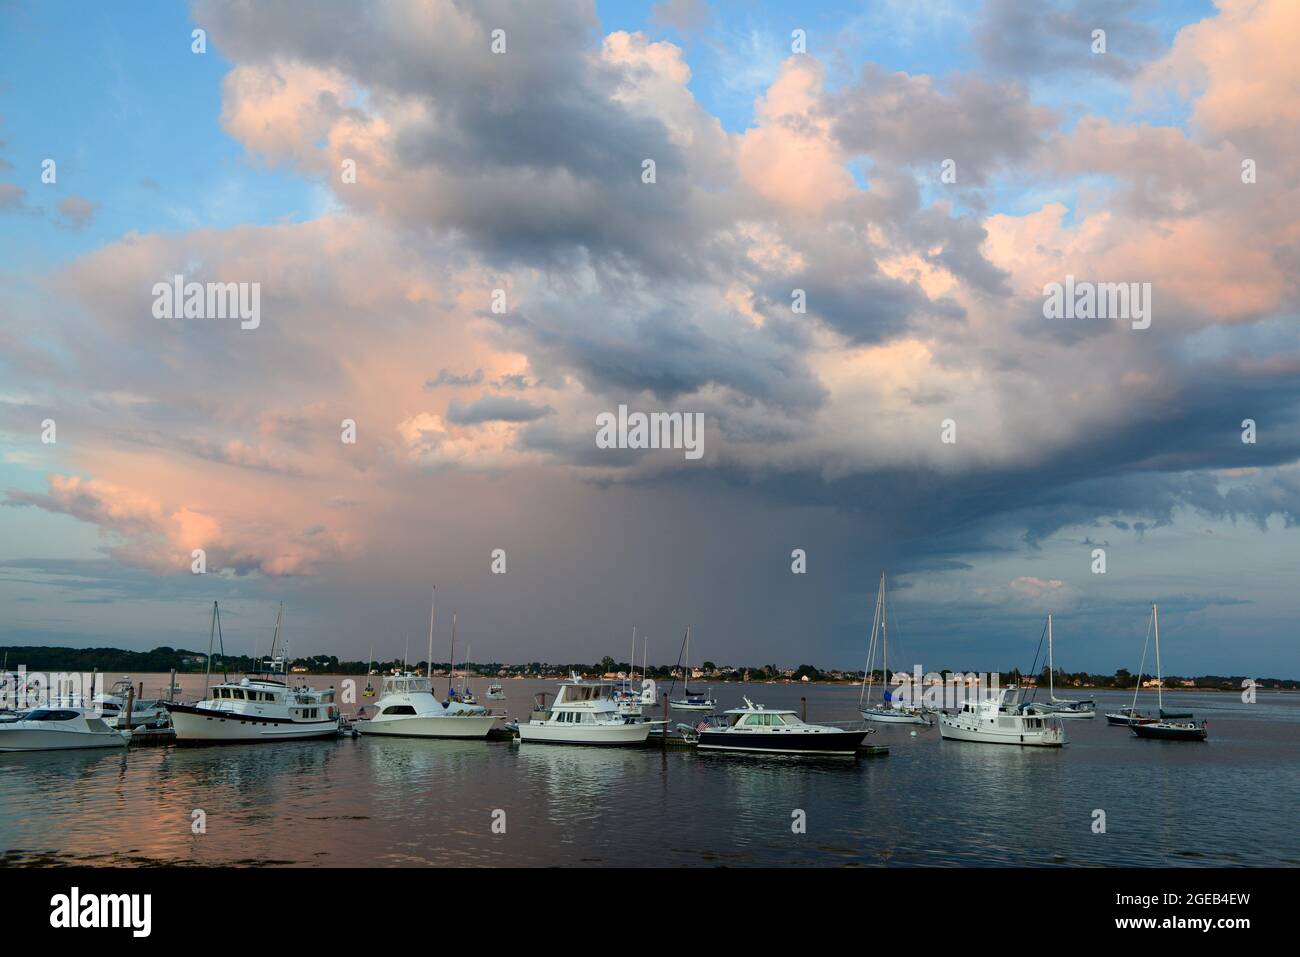 Rampe al tramonto a Dolphin Marina. Harpswell, Maine. Orrs Island in background. Foto Stock